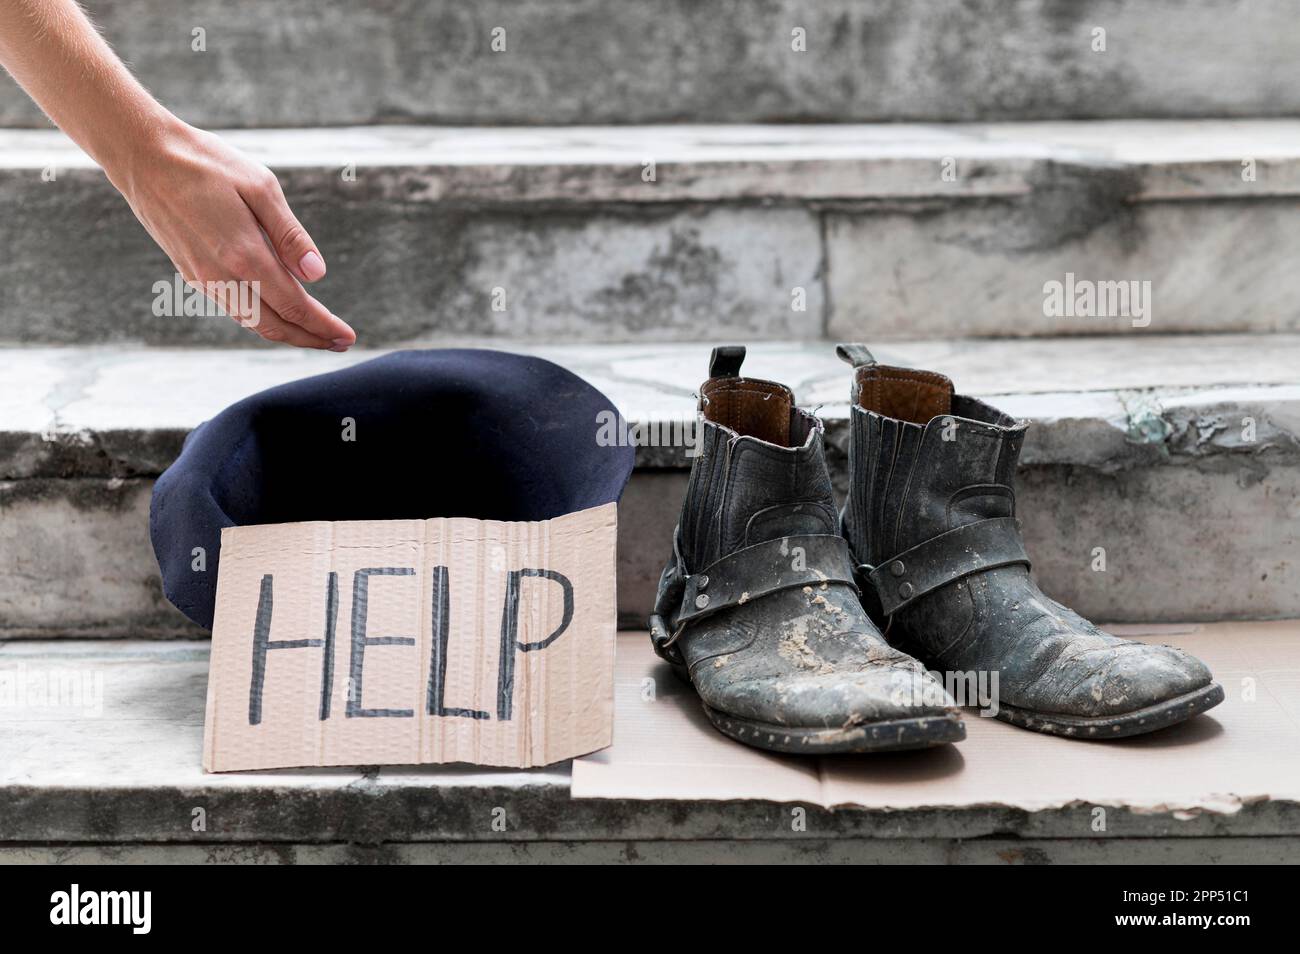 Homeless person begging help Stock Photo